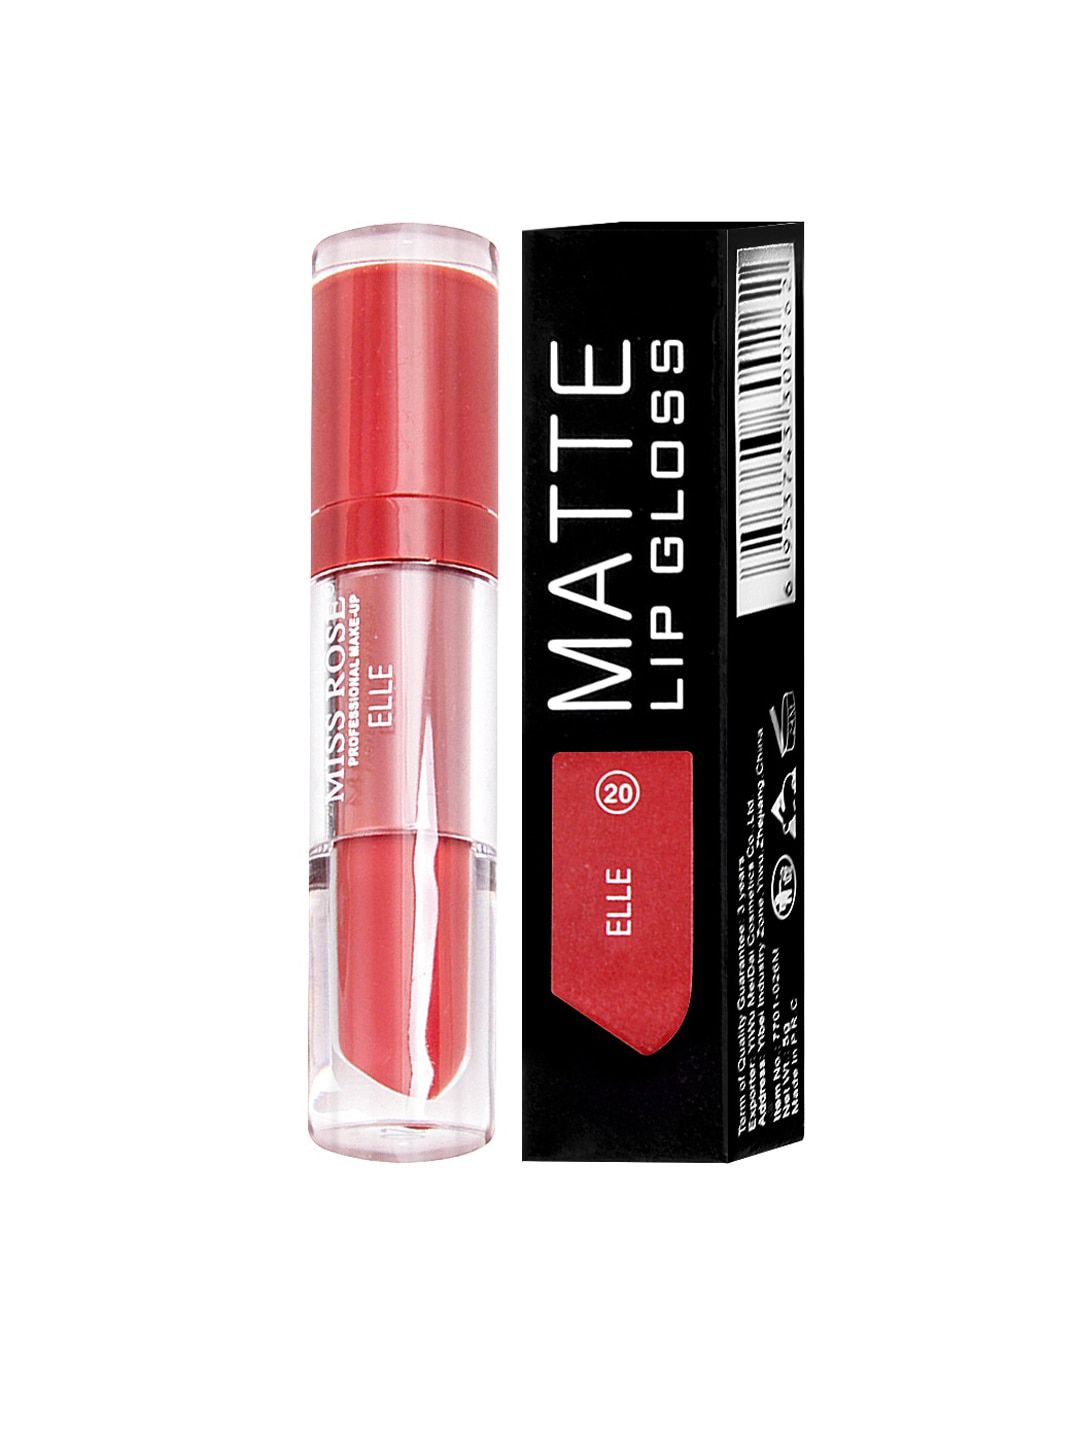 MISS ROSE Matte LipGloss Elle 7701-026M 20 20 gm Price in India